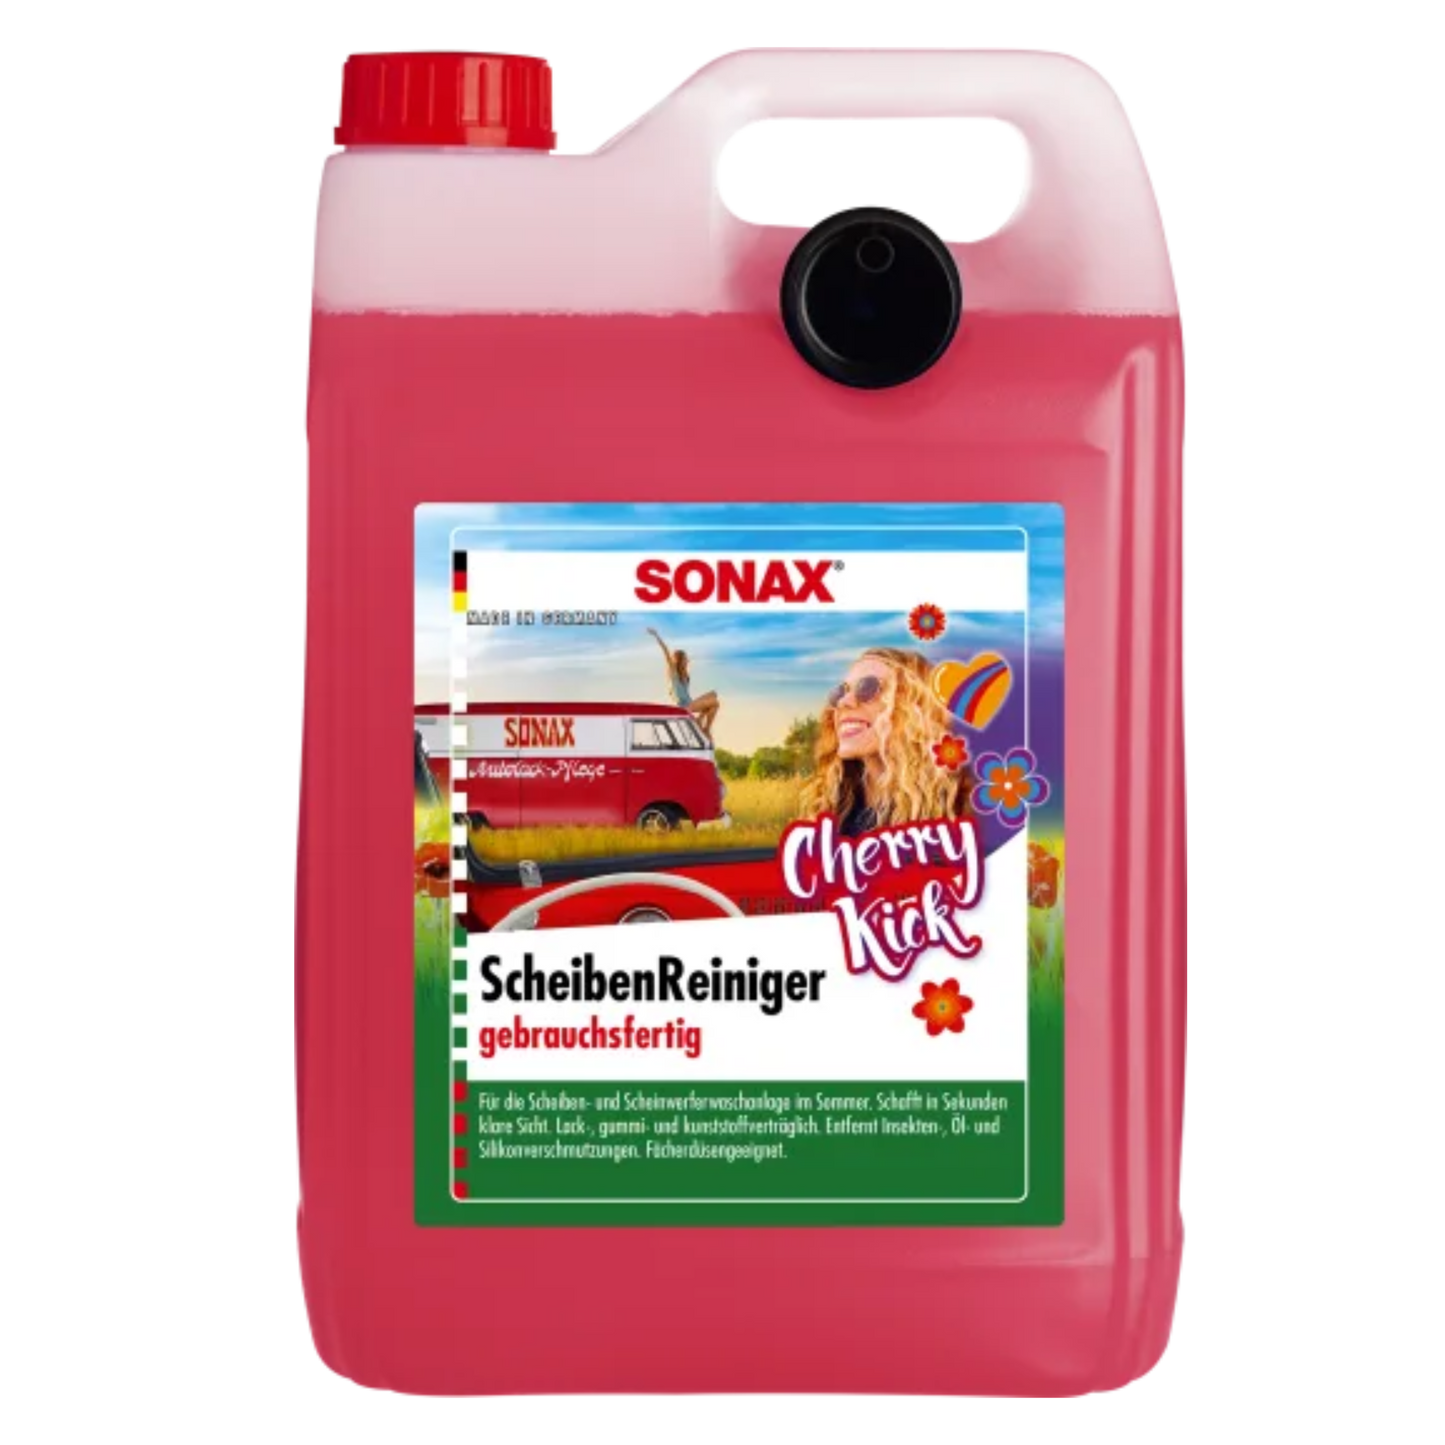 SONAX window cleaner ready to use, 5l